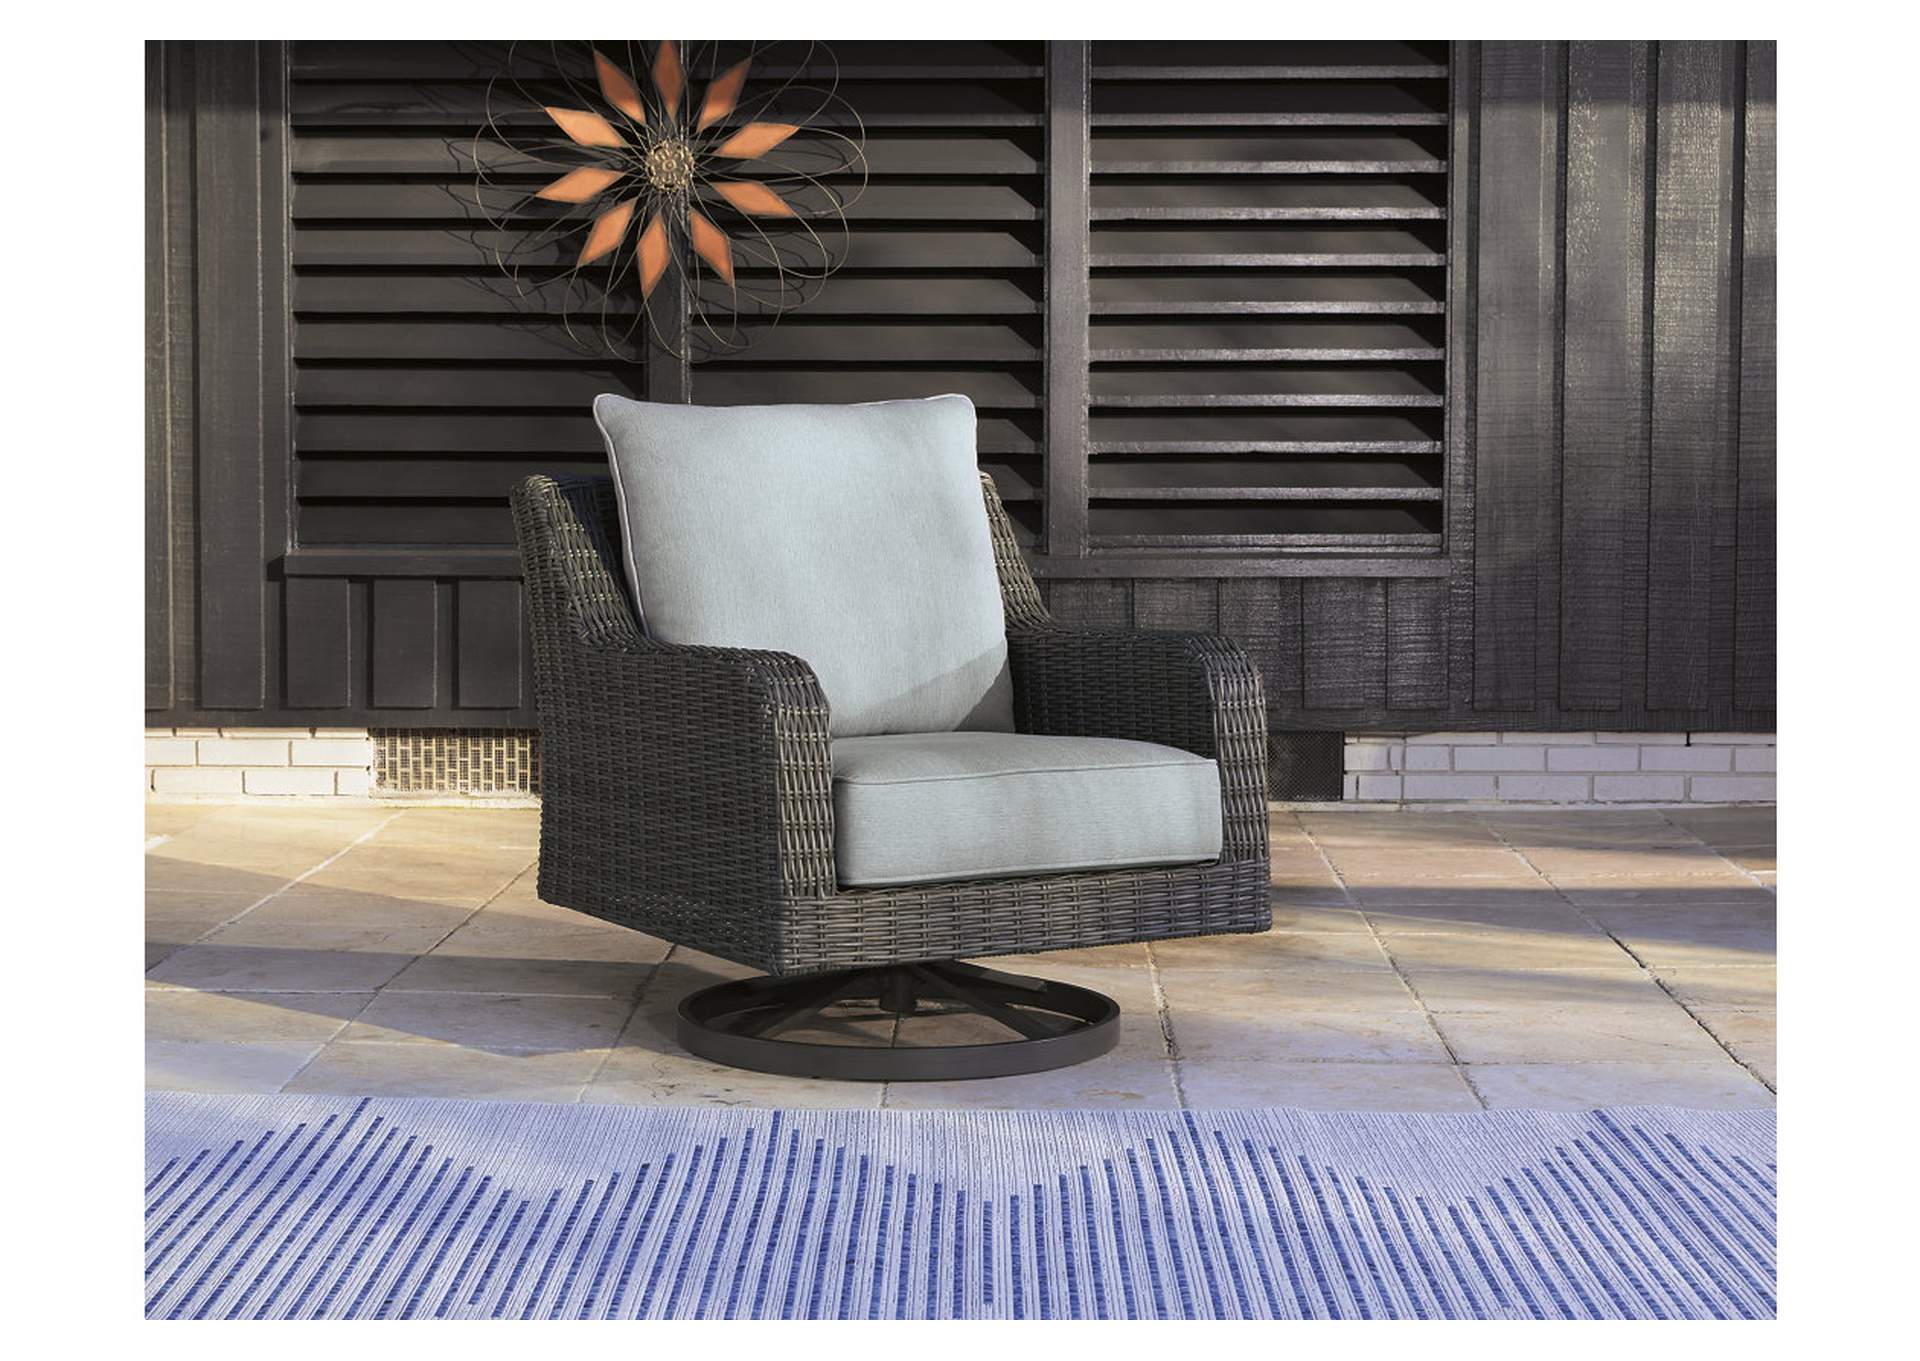 Elite Park Outdoor Swivel Lounge with Cushion,Outdoor By Ashley